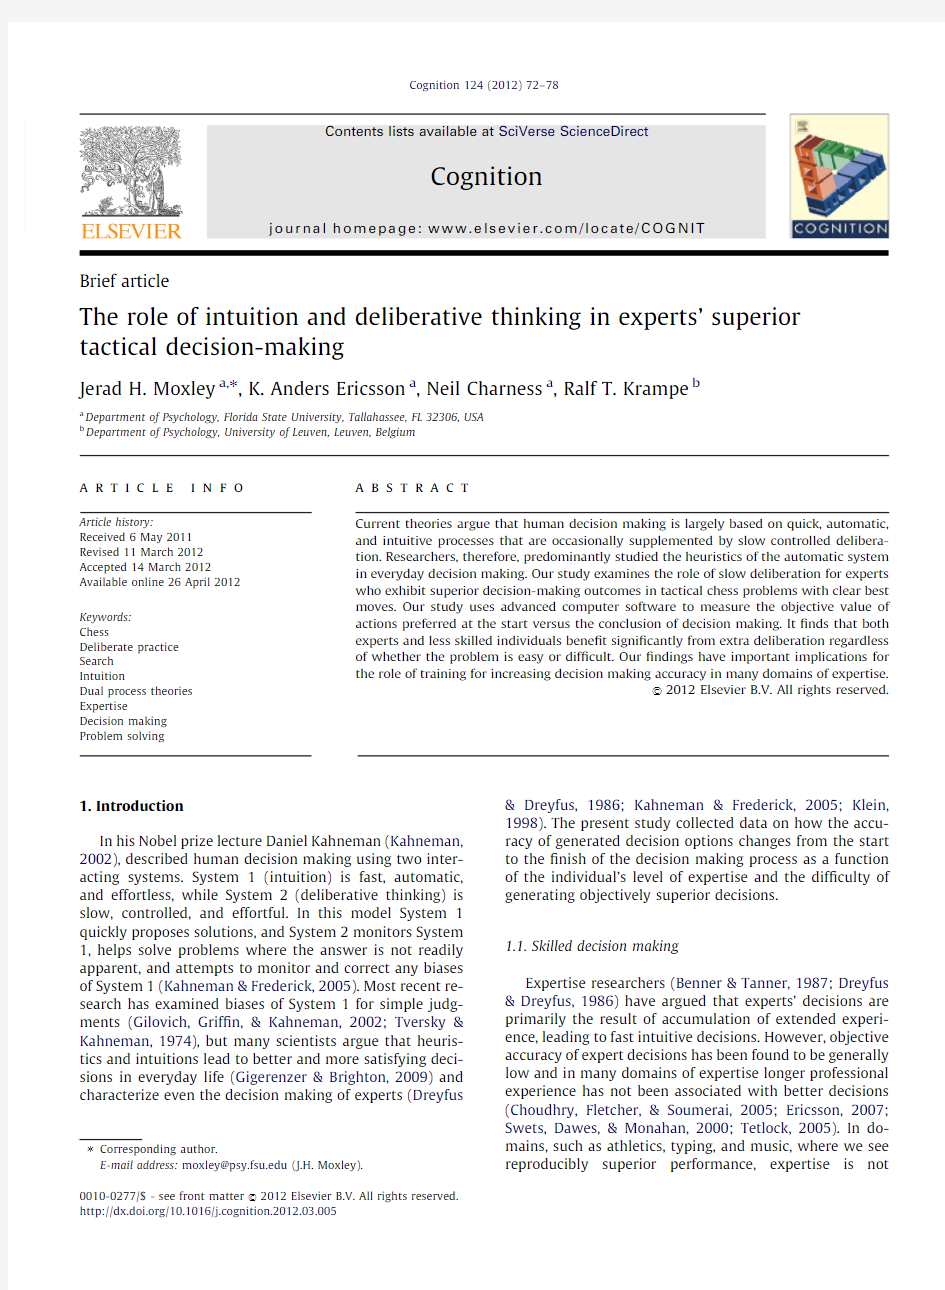 The role of intuition and deliberative thinking in experts’ superior tactical decision-making